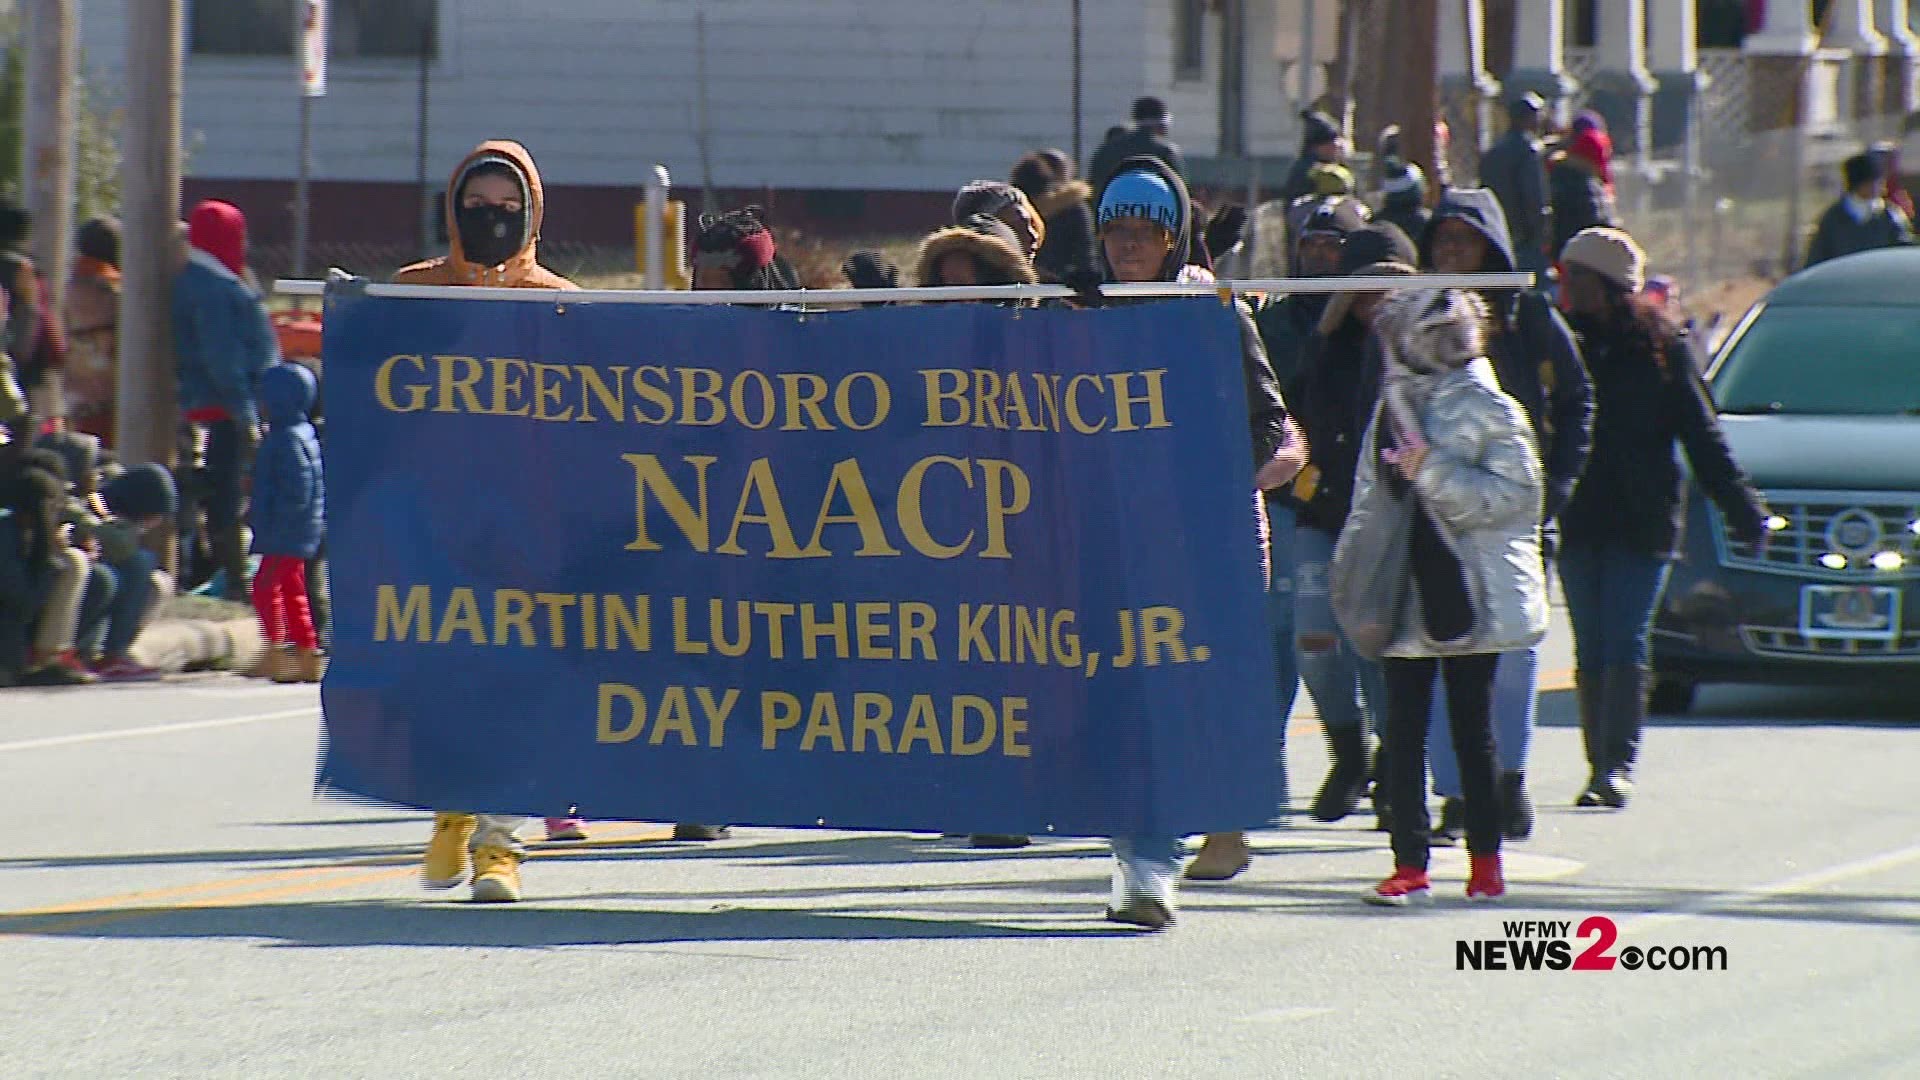 Today, Greensboro celebrated the life and legacy of Dr. Martin Luther King, Jr.